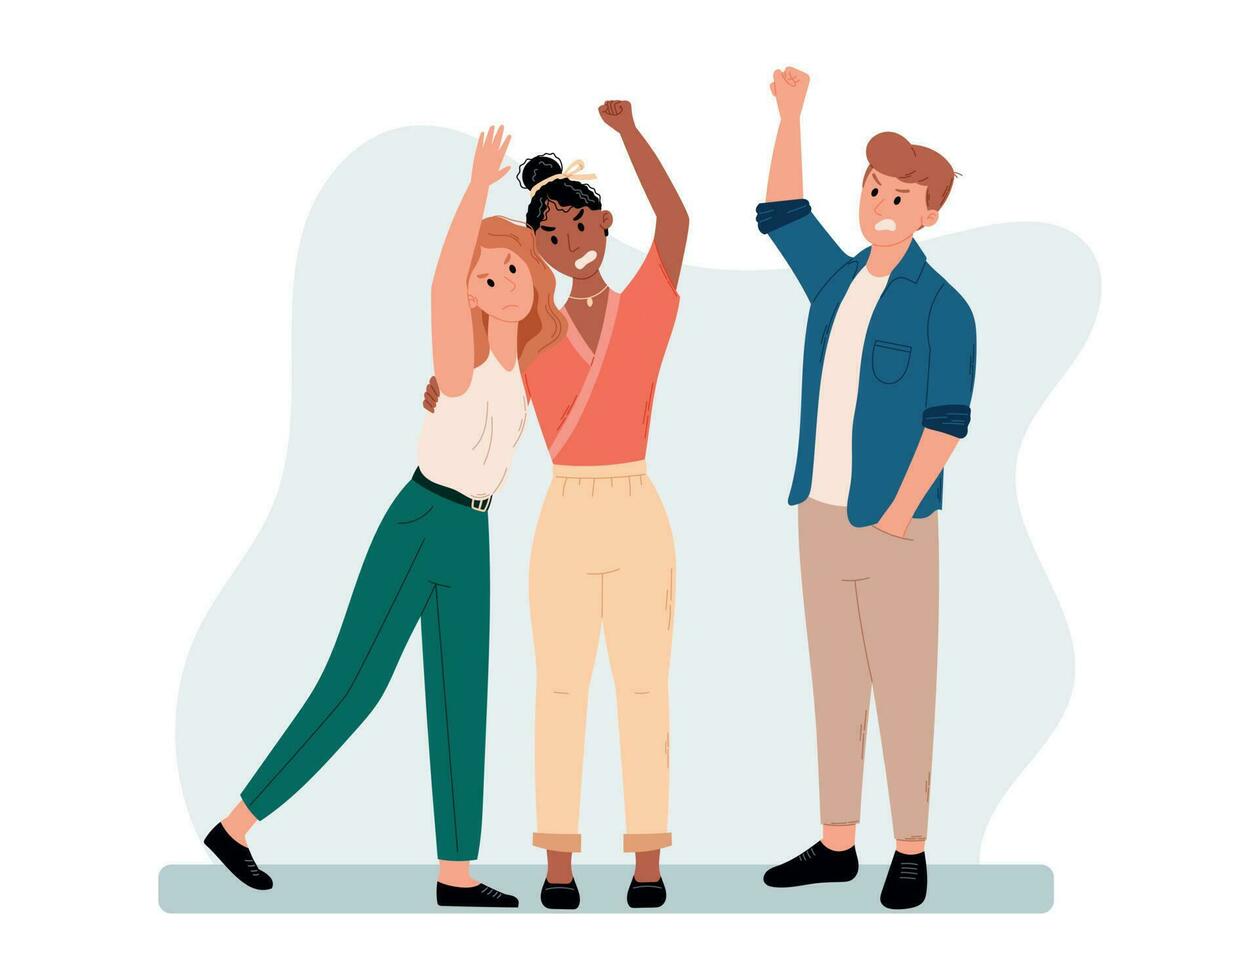 A crowd of people protesting. Women and man defending their rights with raised hand at a social rally or vote. Vector isolated cartoon illustration.